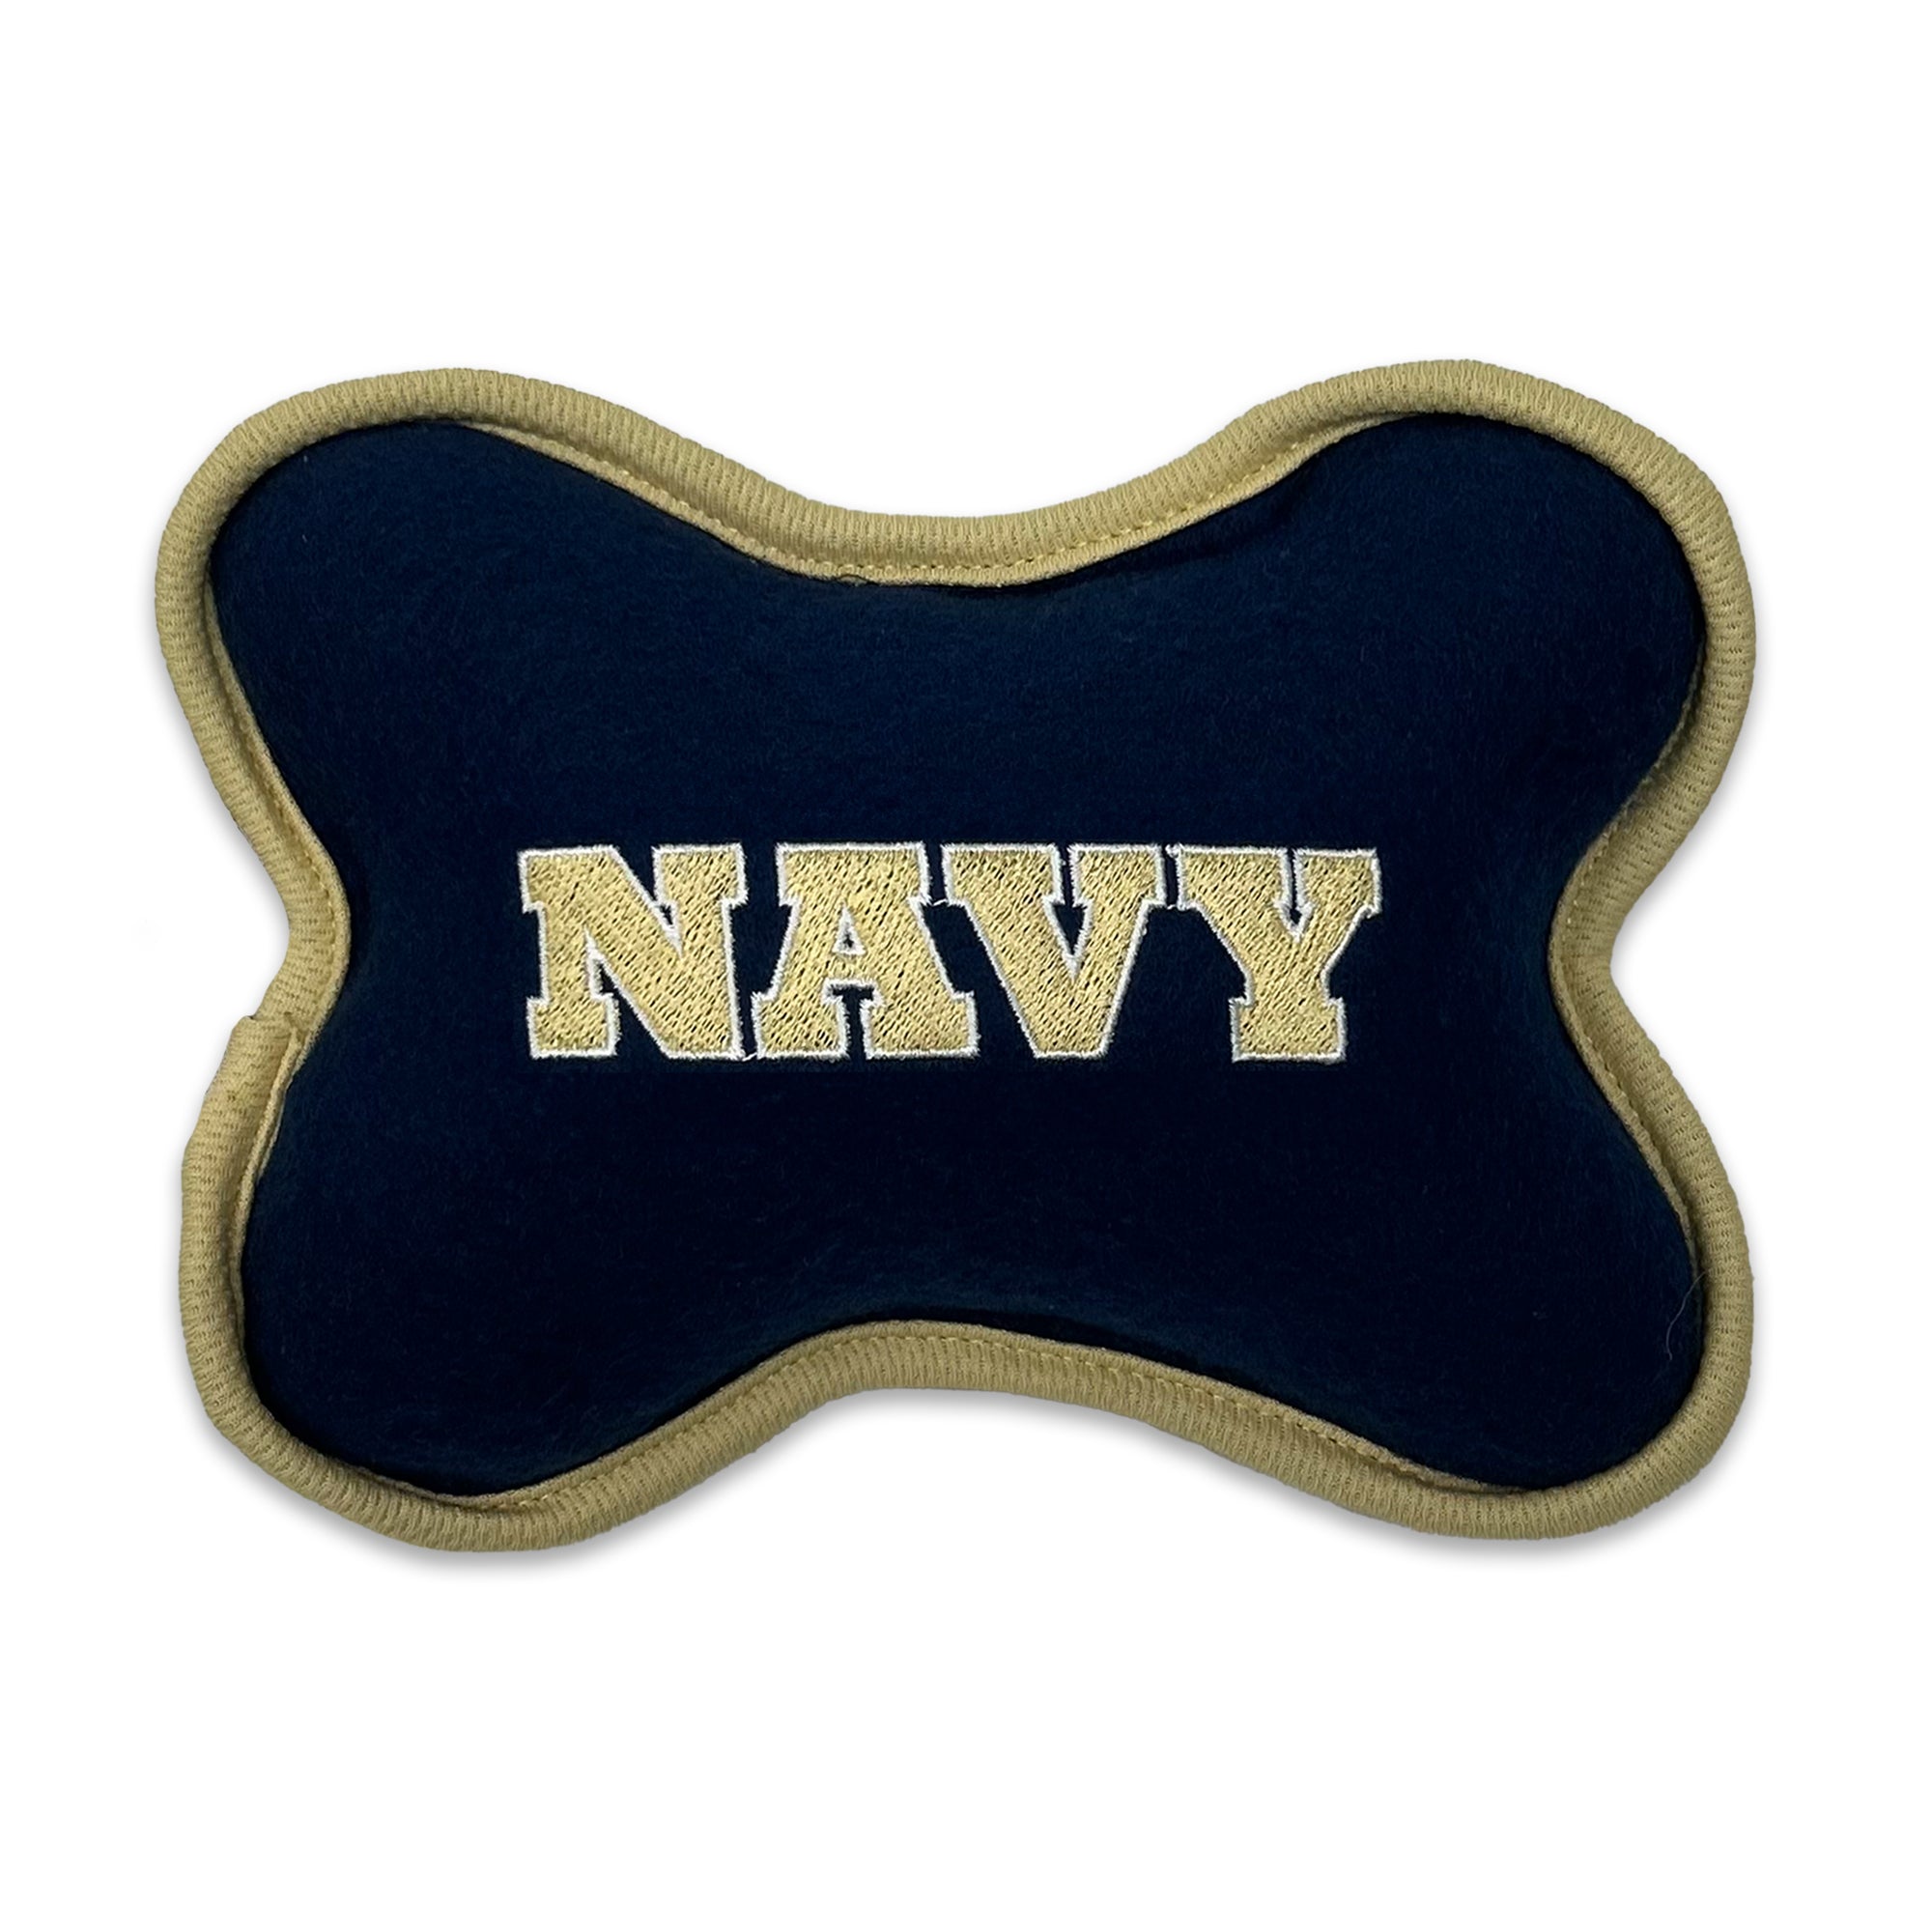 Navy Embroidered Bone Shaped Squeak Toy (Small - 8")